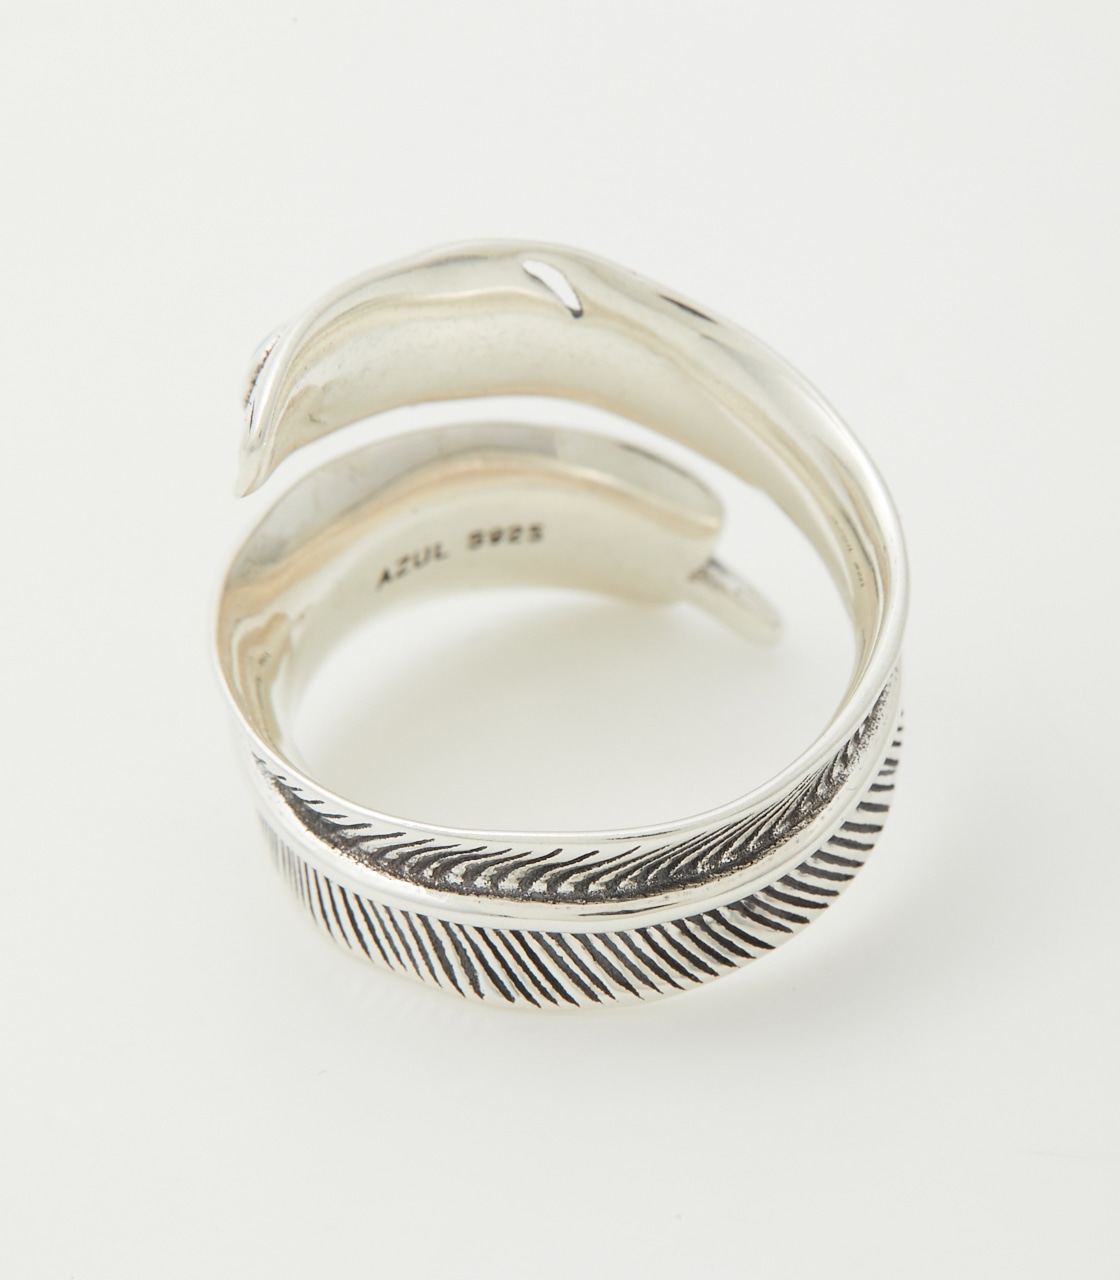 SILVER FEATHER RING/シルバーフェザーリング 詳細画像 SLV 4